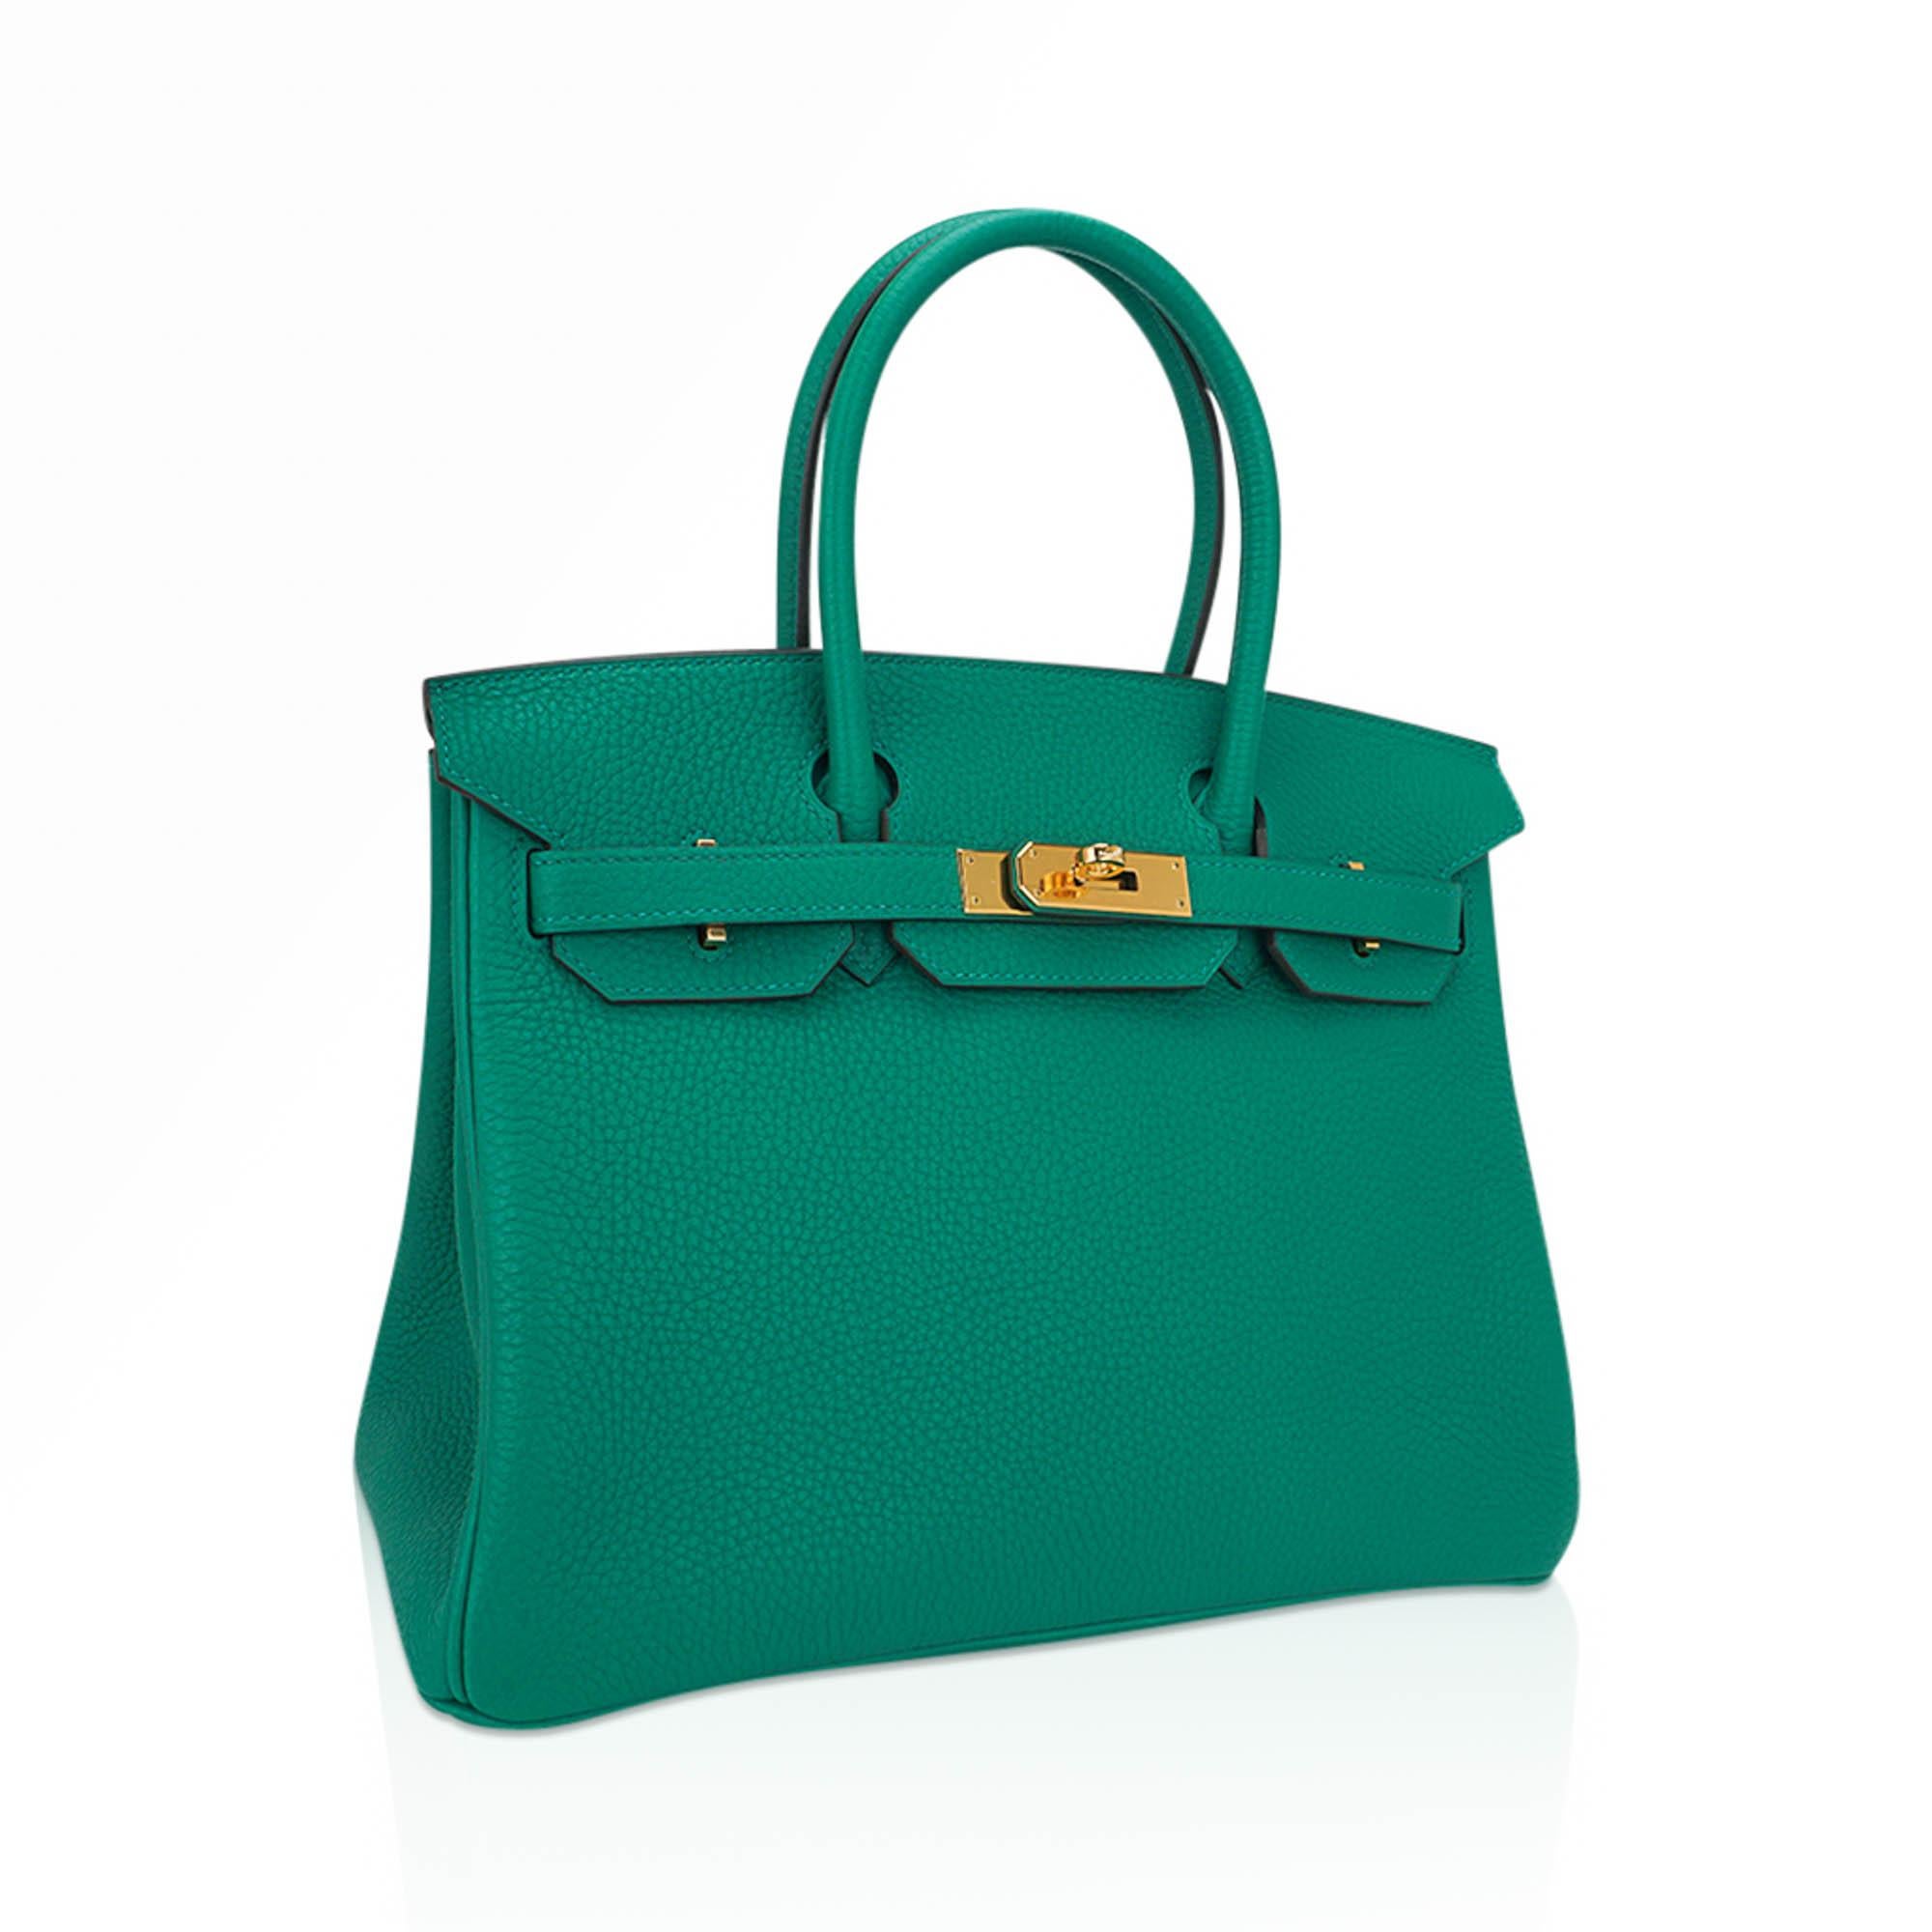 Mightychic offers an Hermes Birkin 30 bag featured in rare Vert Verone.
Rich gold hardware accentuates the beautiful colour of this Birkin bag.
This beauty will take you year round.
Togo leather is supple and scratch resistant.
Comes with the lock